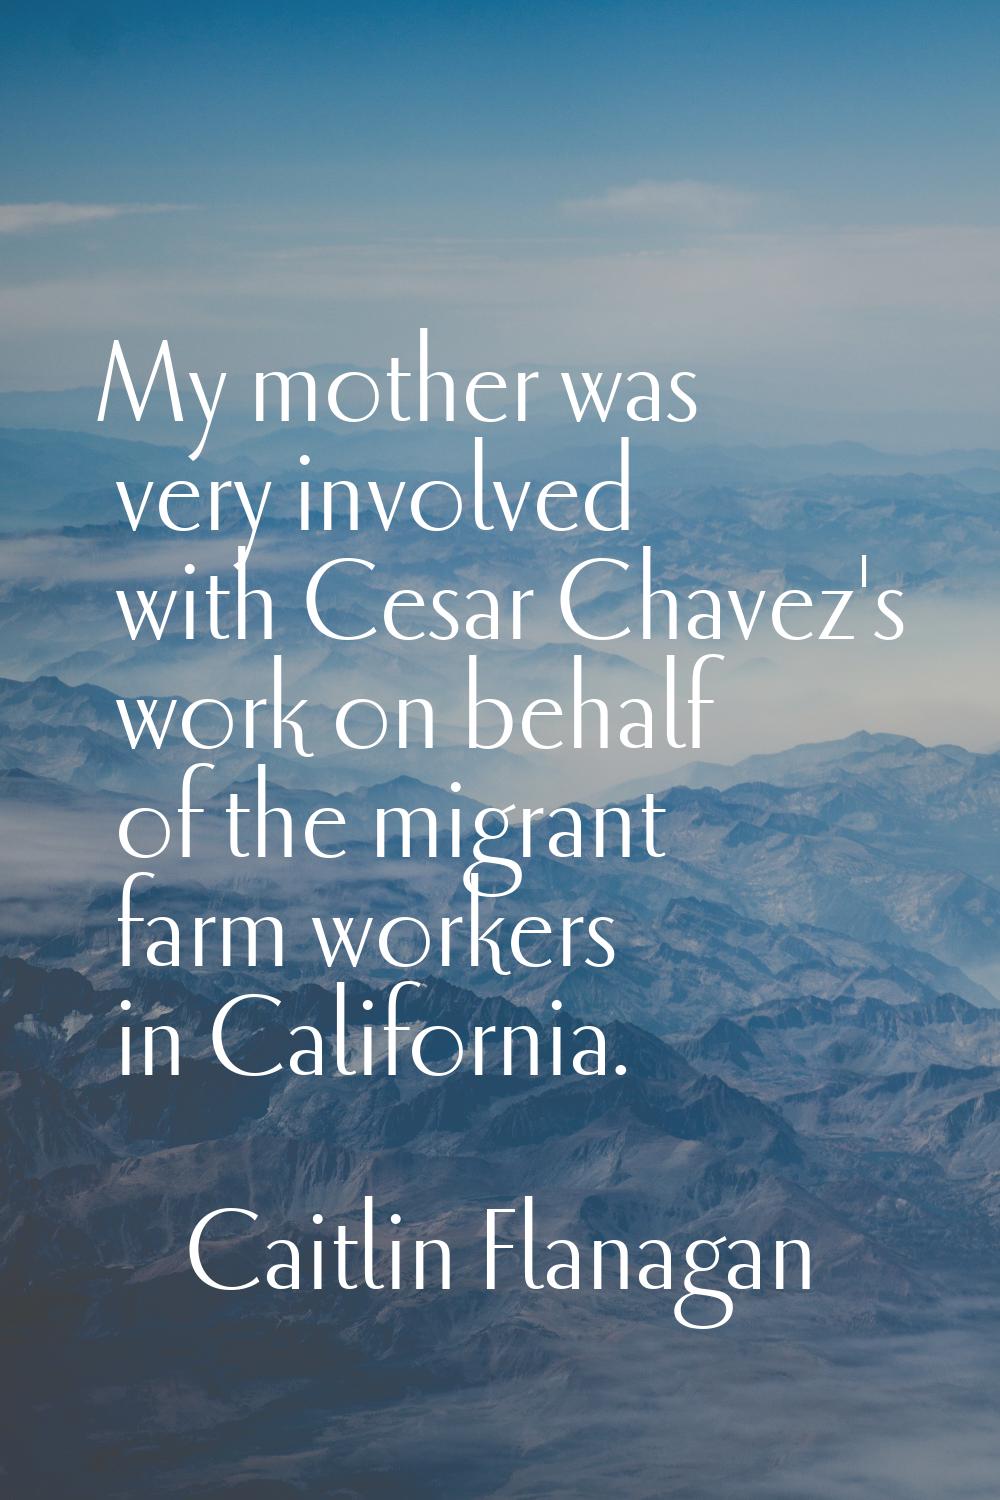 My mother was very involved with Cesar Chavez's work on behalf of the migrant farm workers in Calif